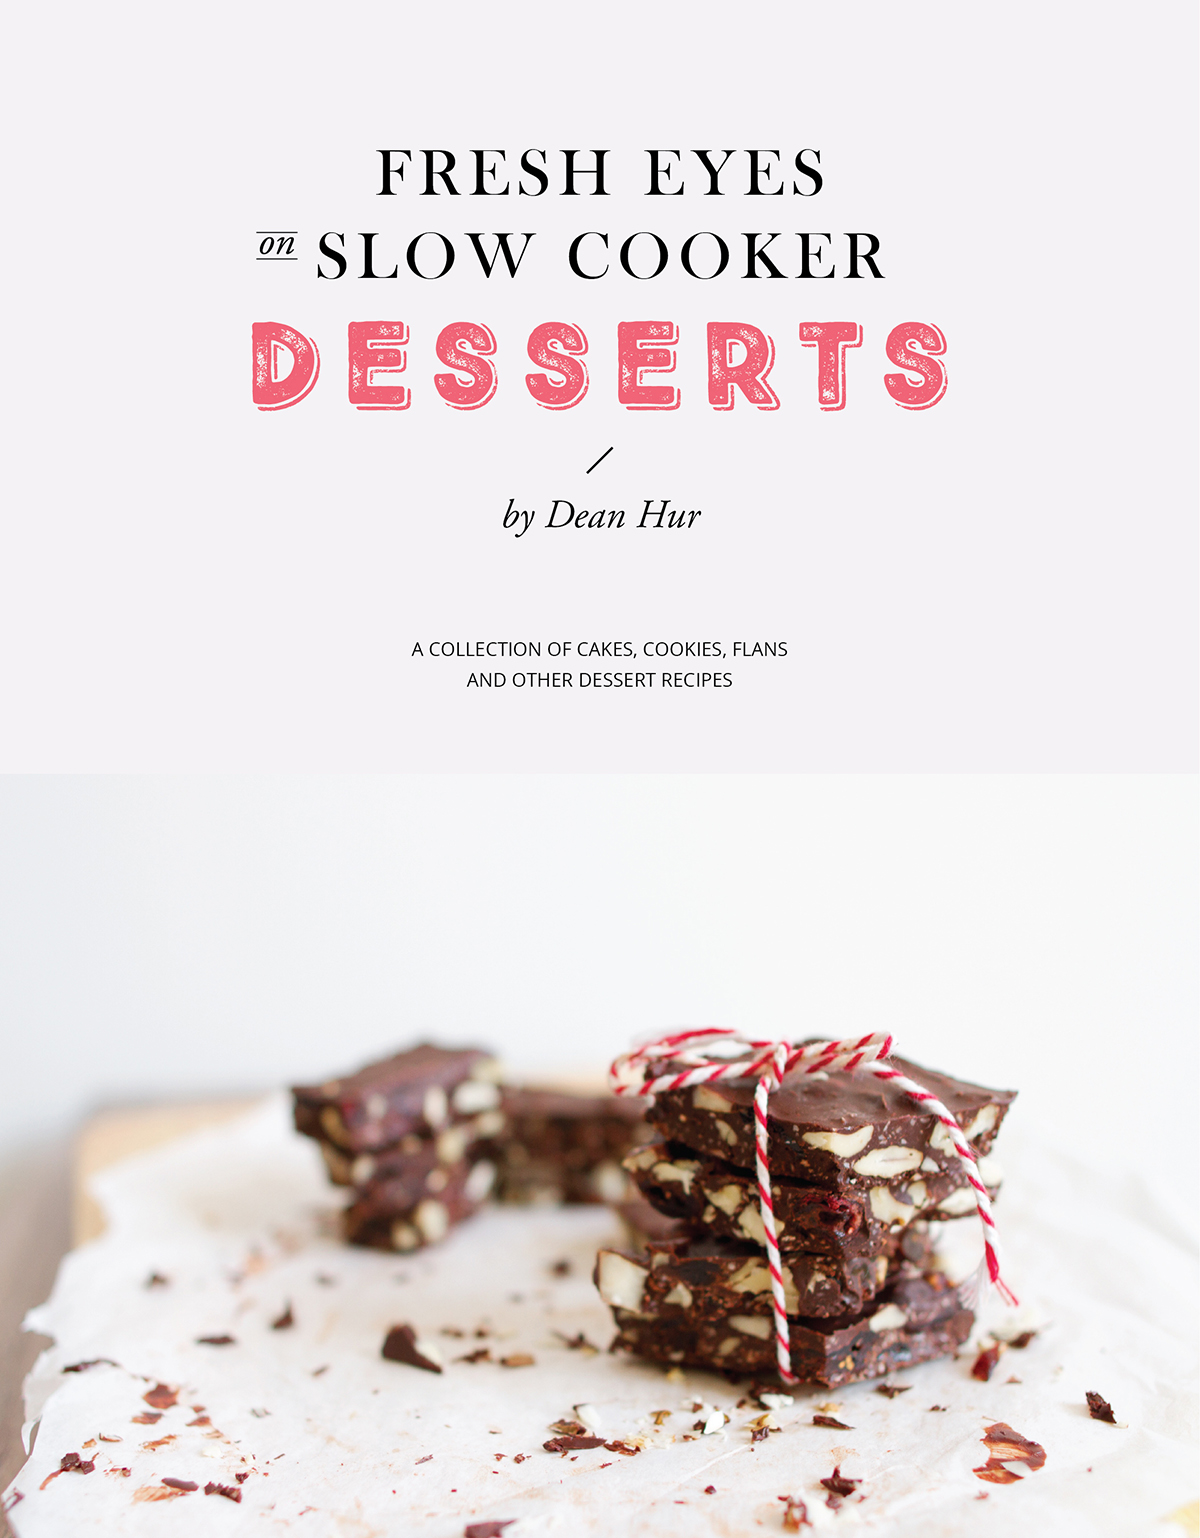 FREE: Fresh Eyes on Slow Cooker: DESSERTS by Dean Hur